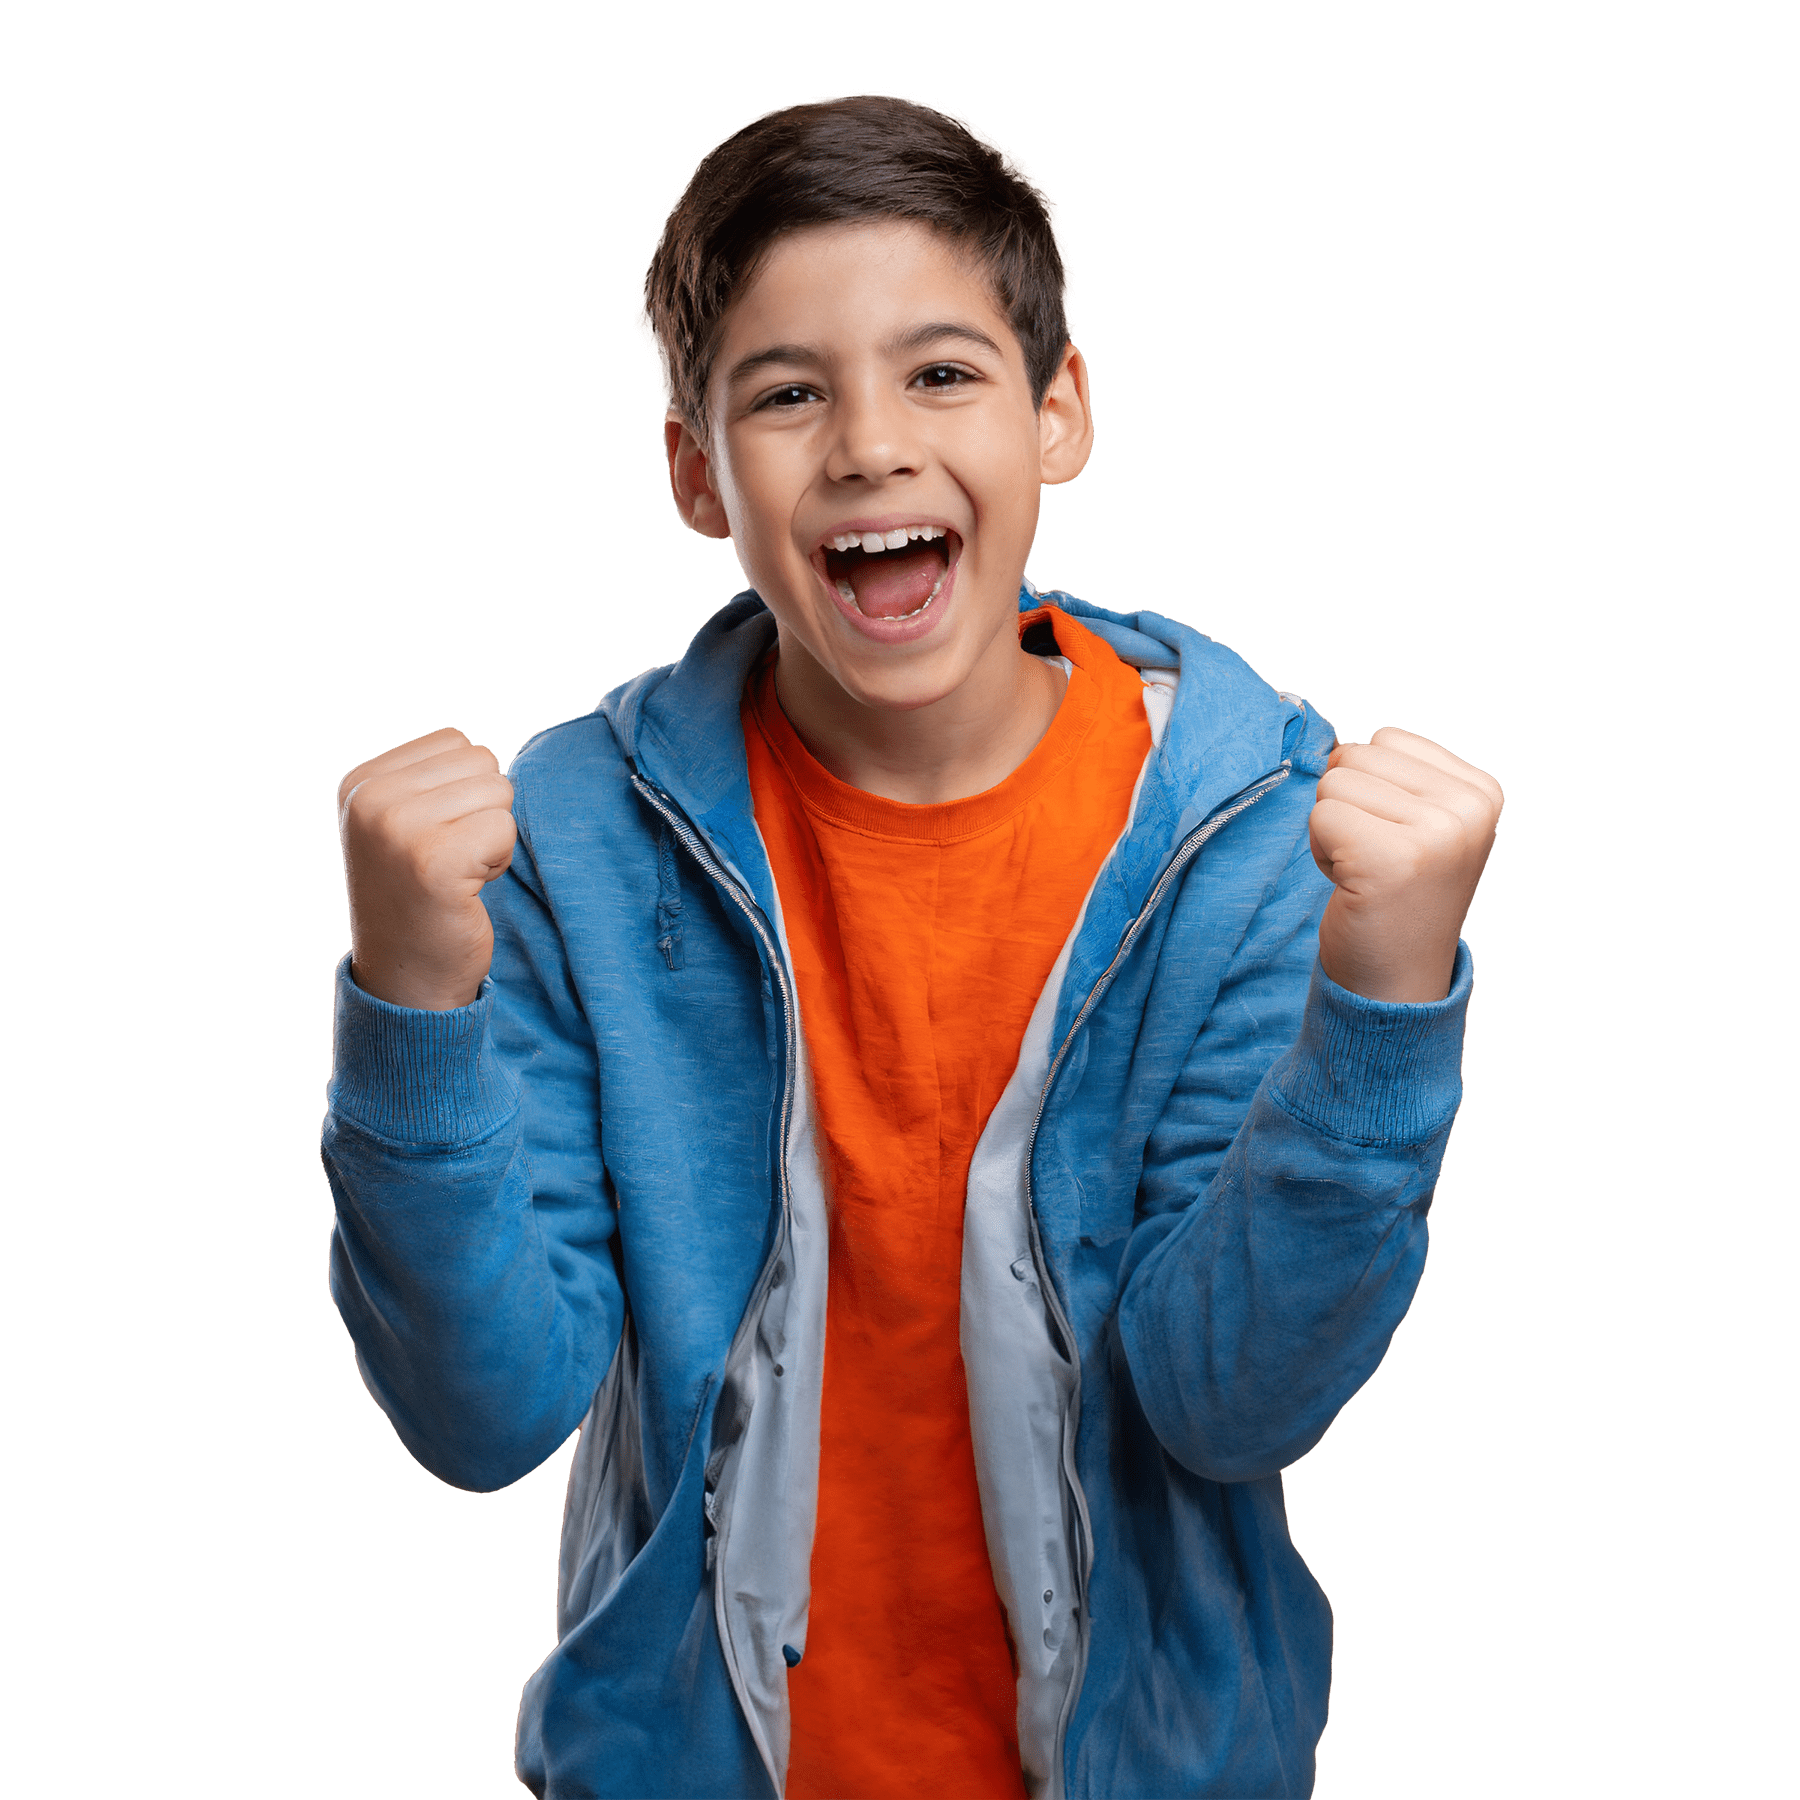 A boy is celebrating with his fists up on a white background.